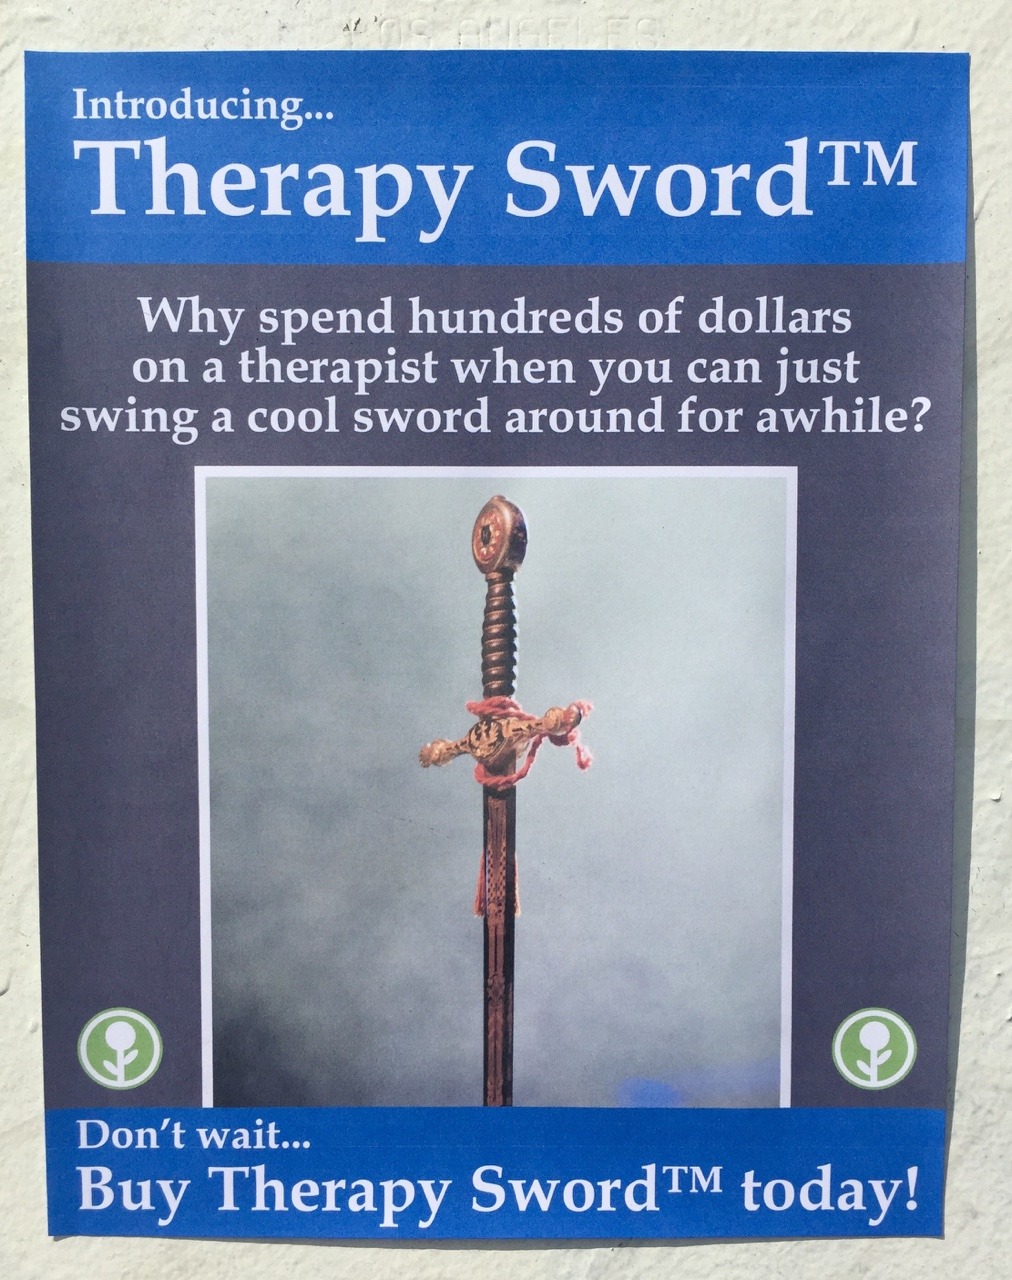 Introducing... Therapy SwordTM Why spend hundreds of dollars on a therapist when you can just swing a cool sword around for awhile? Don't wait... Buy Therapy SwordTM today!